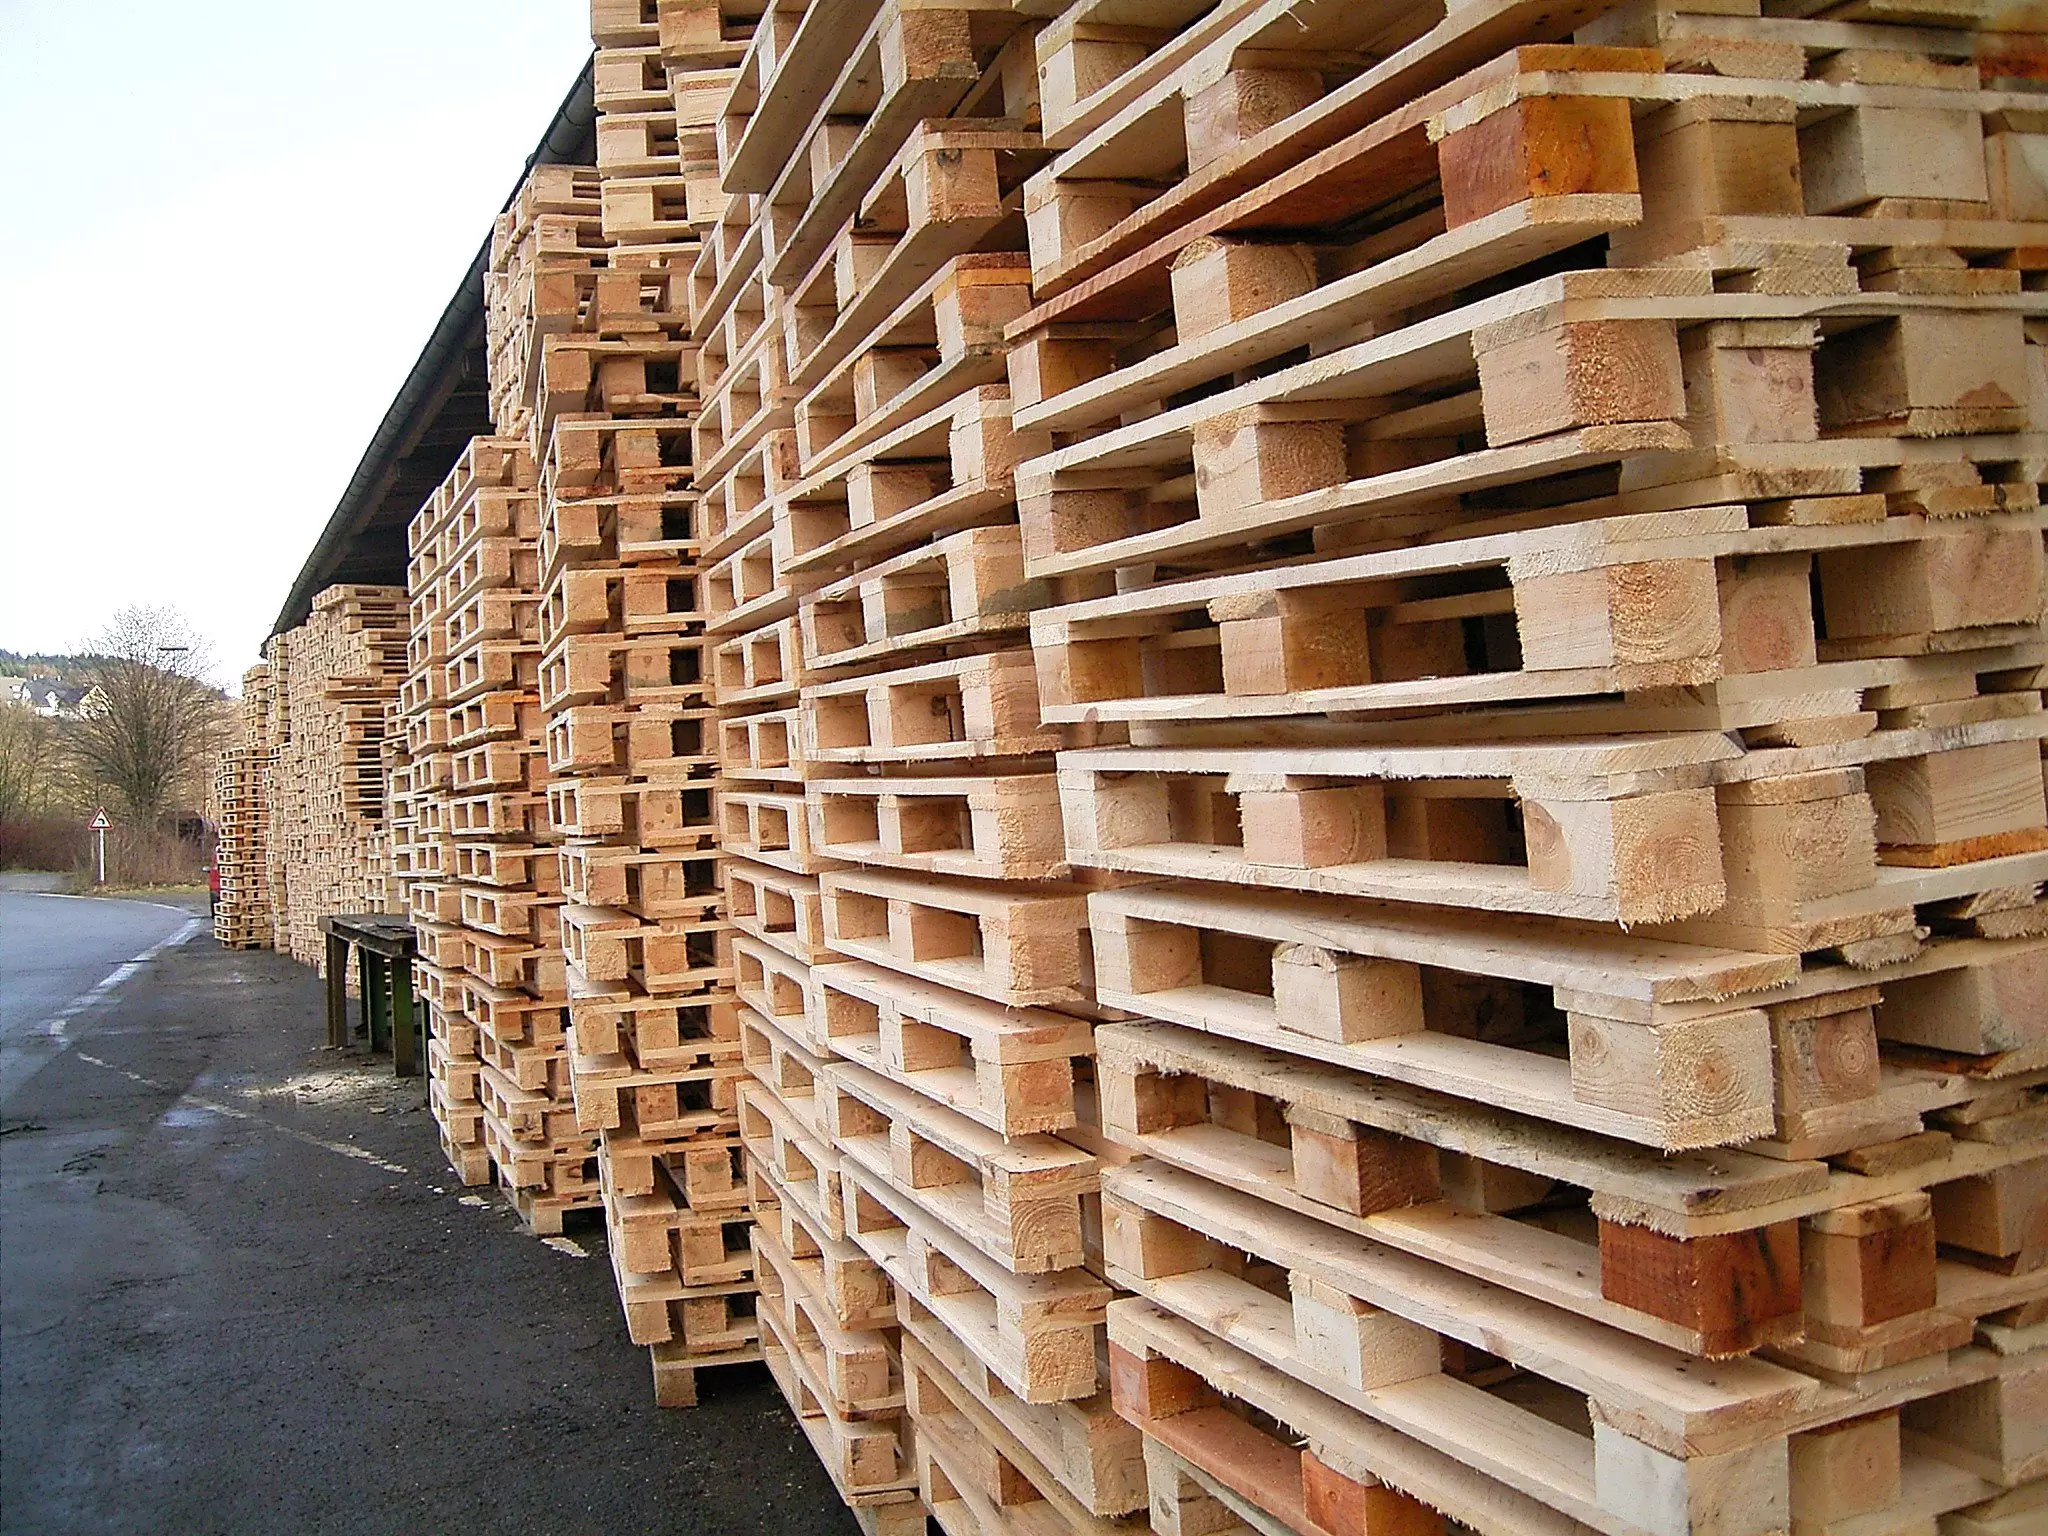 Anyone else feeling seriously inspired to go and pick up some old pallets right now? (